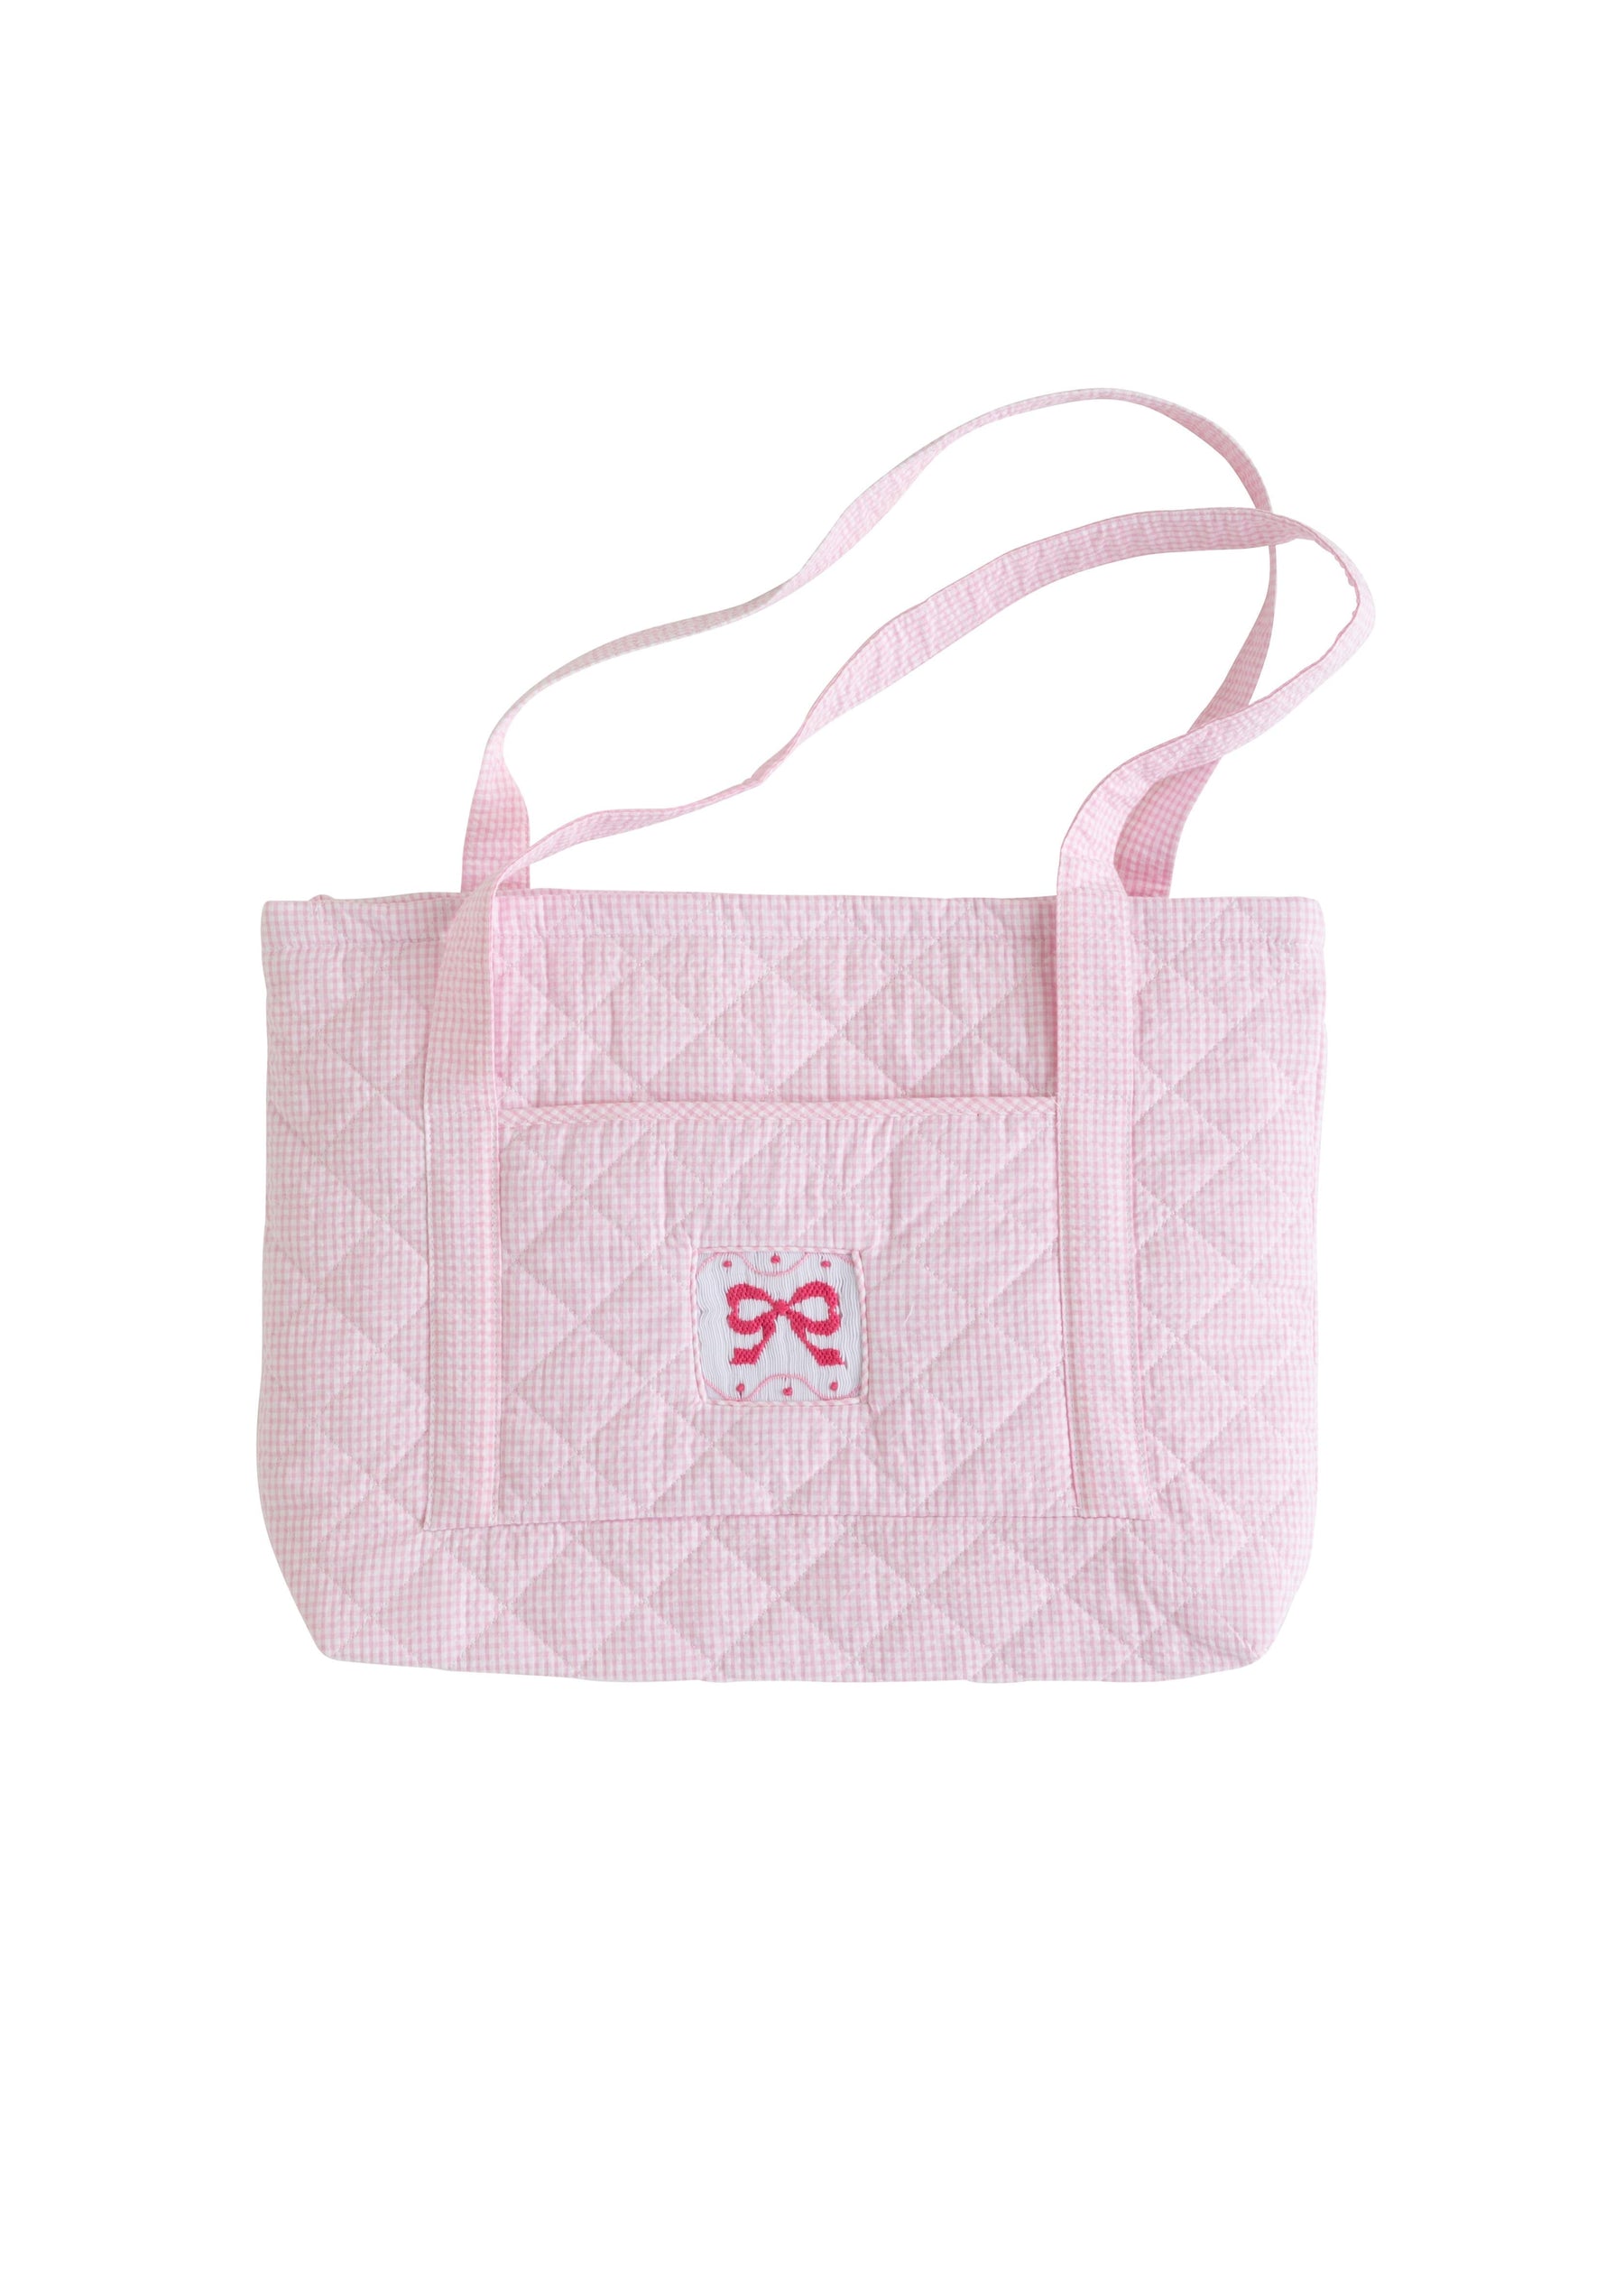 seguridadindustrialcr classic children's luggage pink bow tote bag